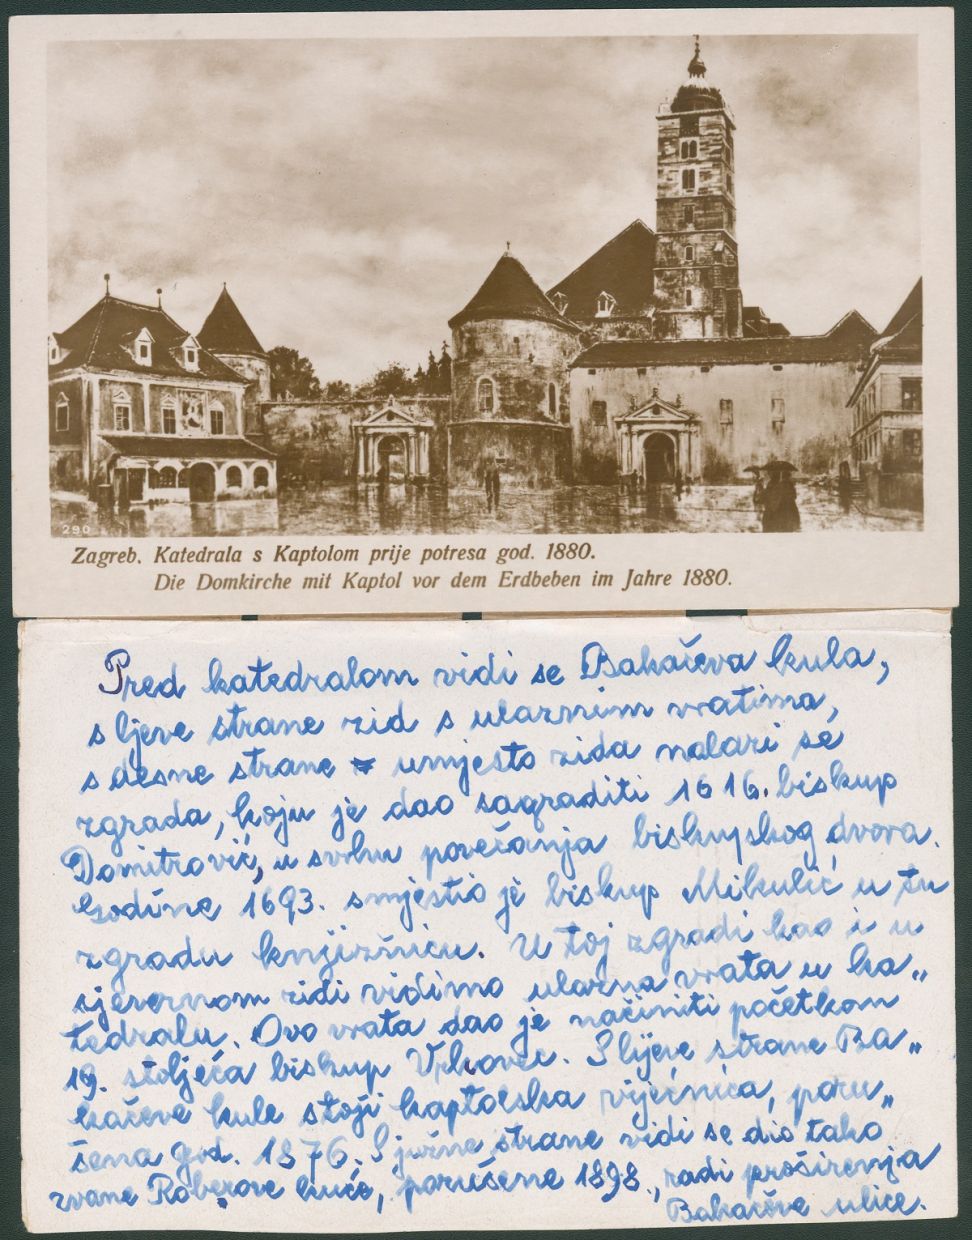 Photograph of Bakac's tower Zagreb Cathedral with Kaptol, with a handwritten note underneath